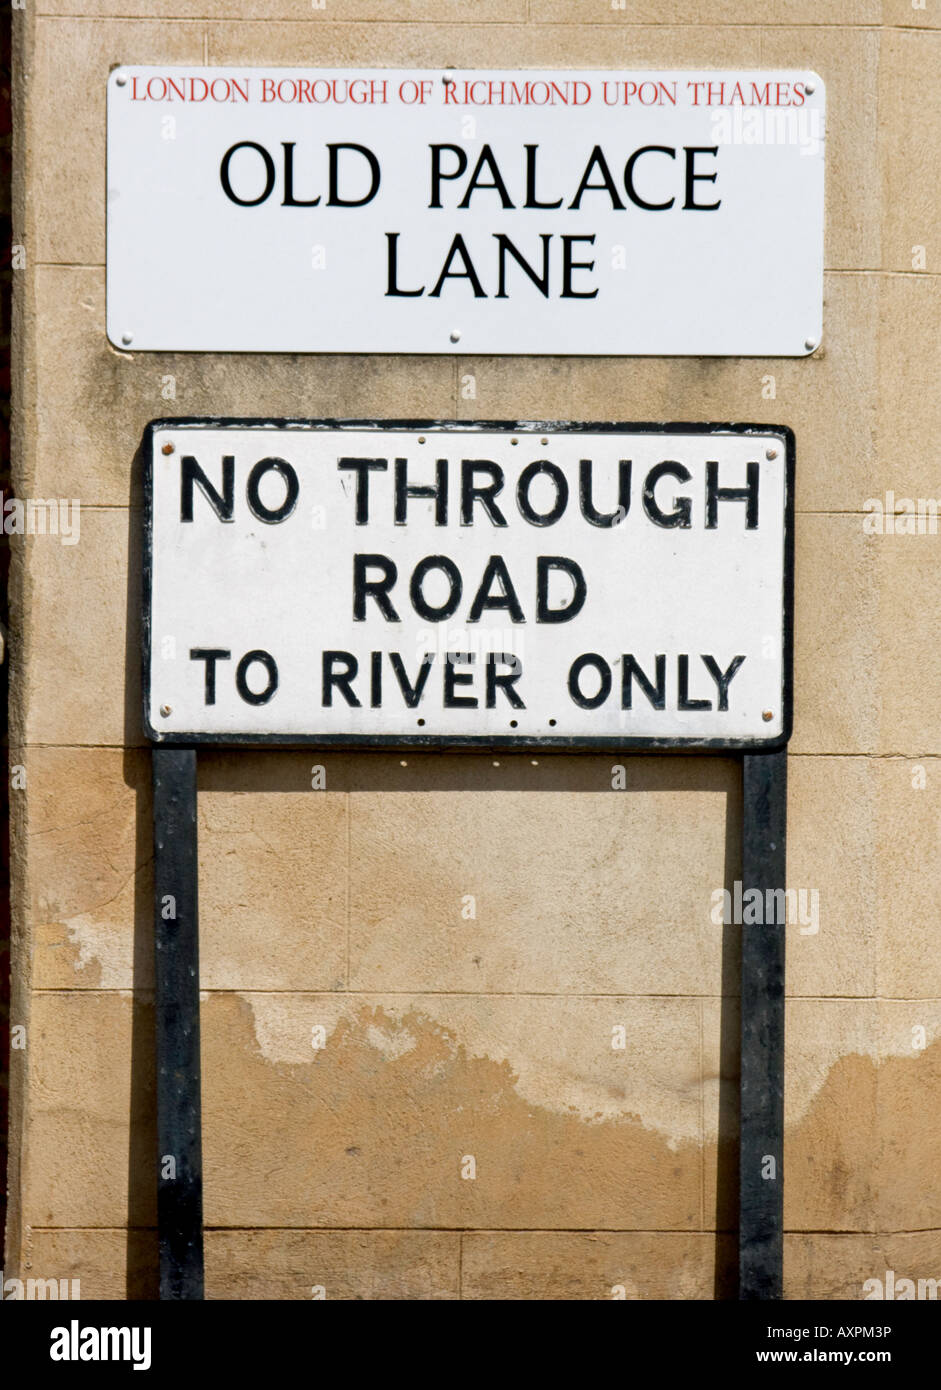 street sign for old palace lane and separate sign warning of road leading to river only, located in richmond, surrey, england Stock Photo